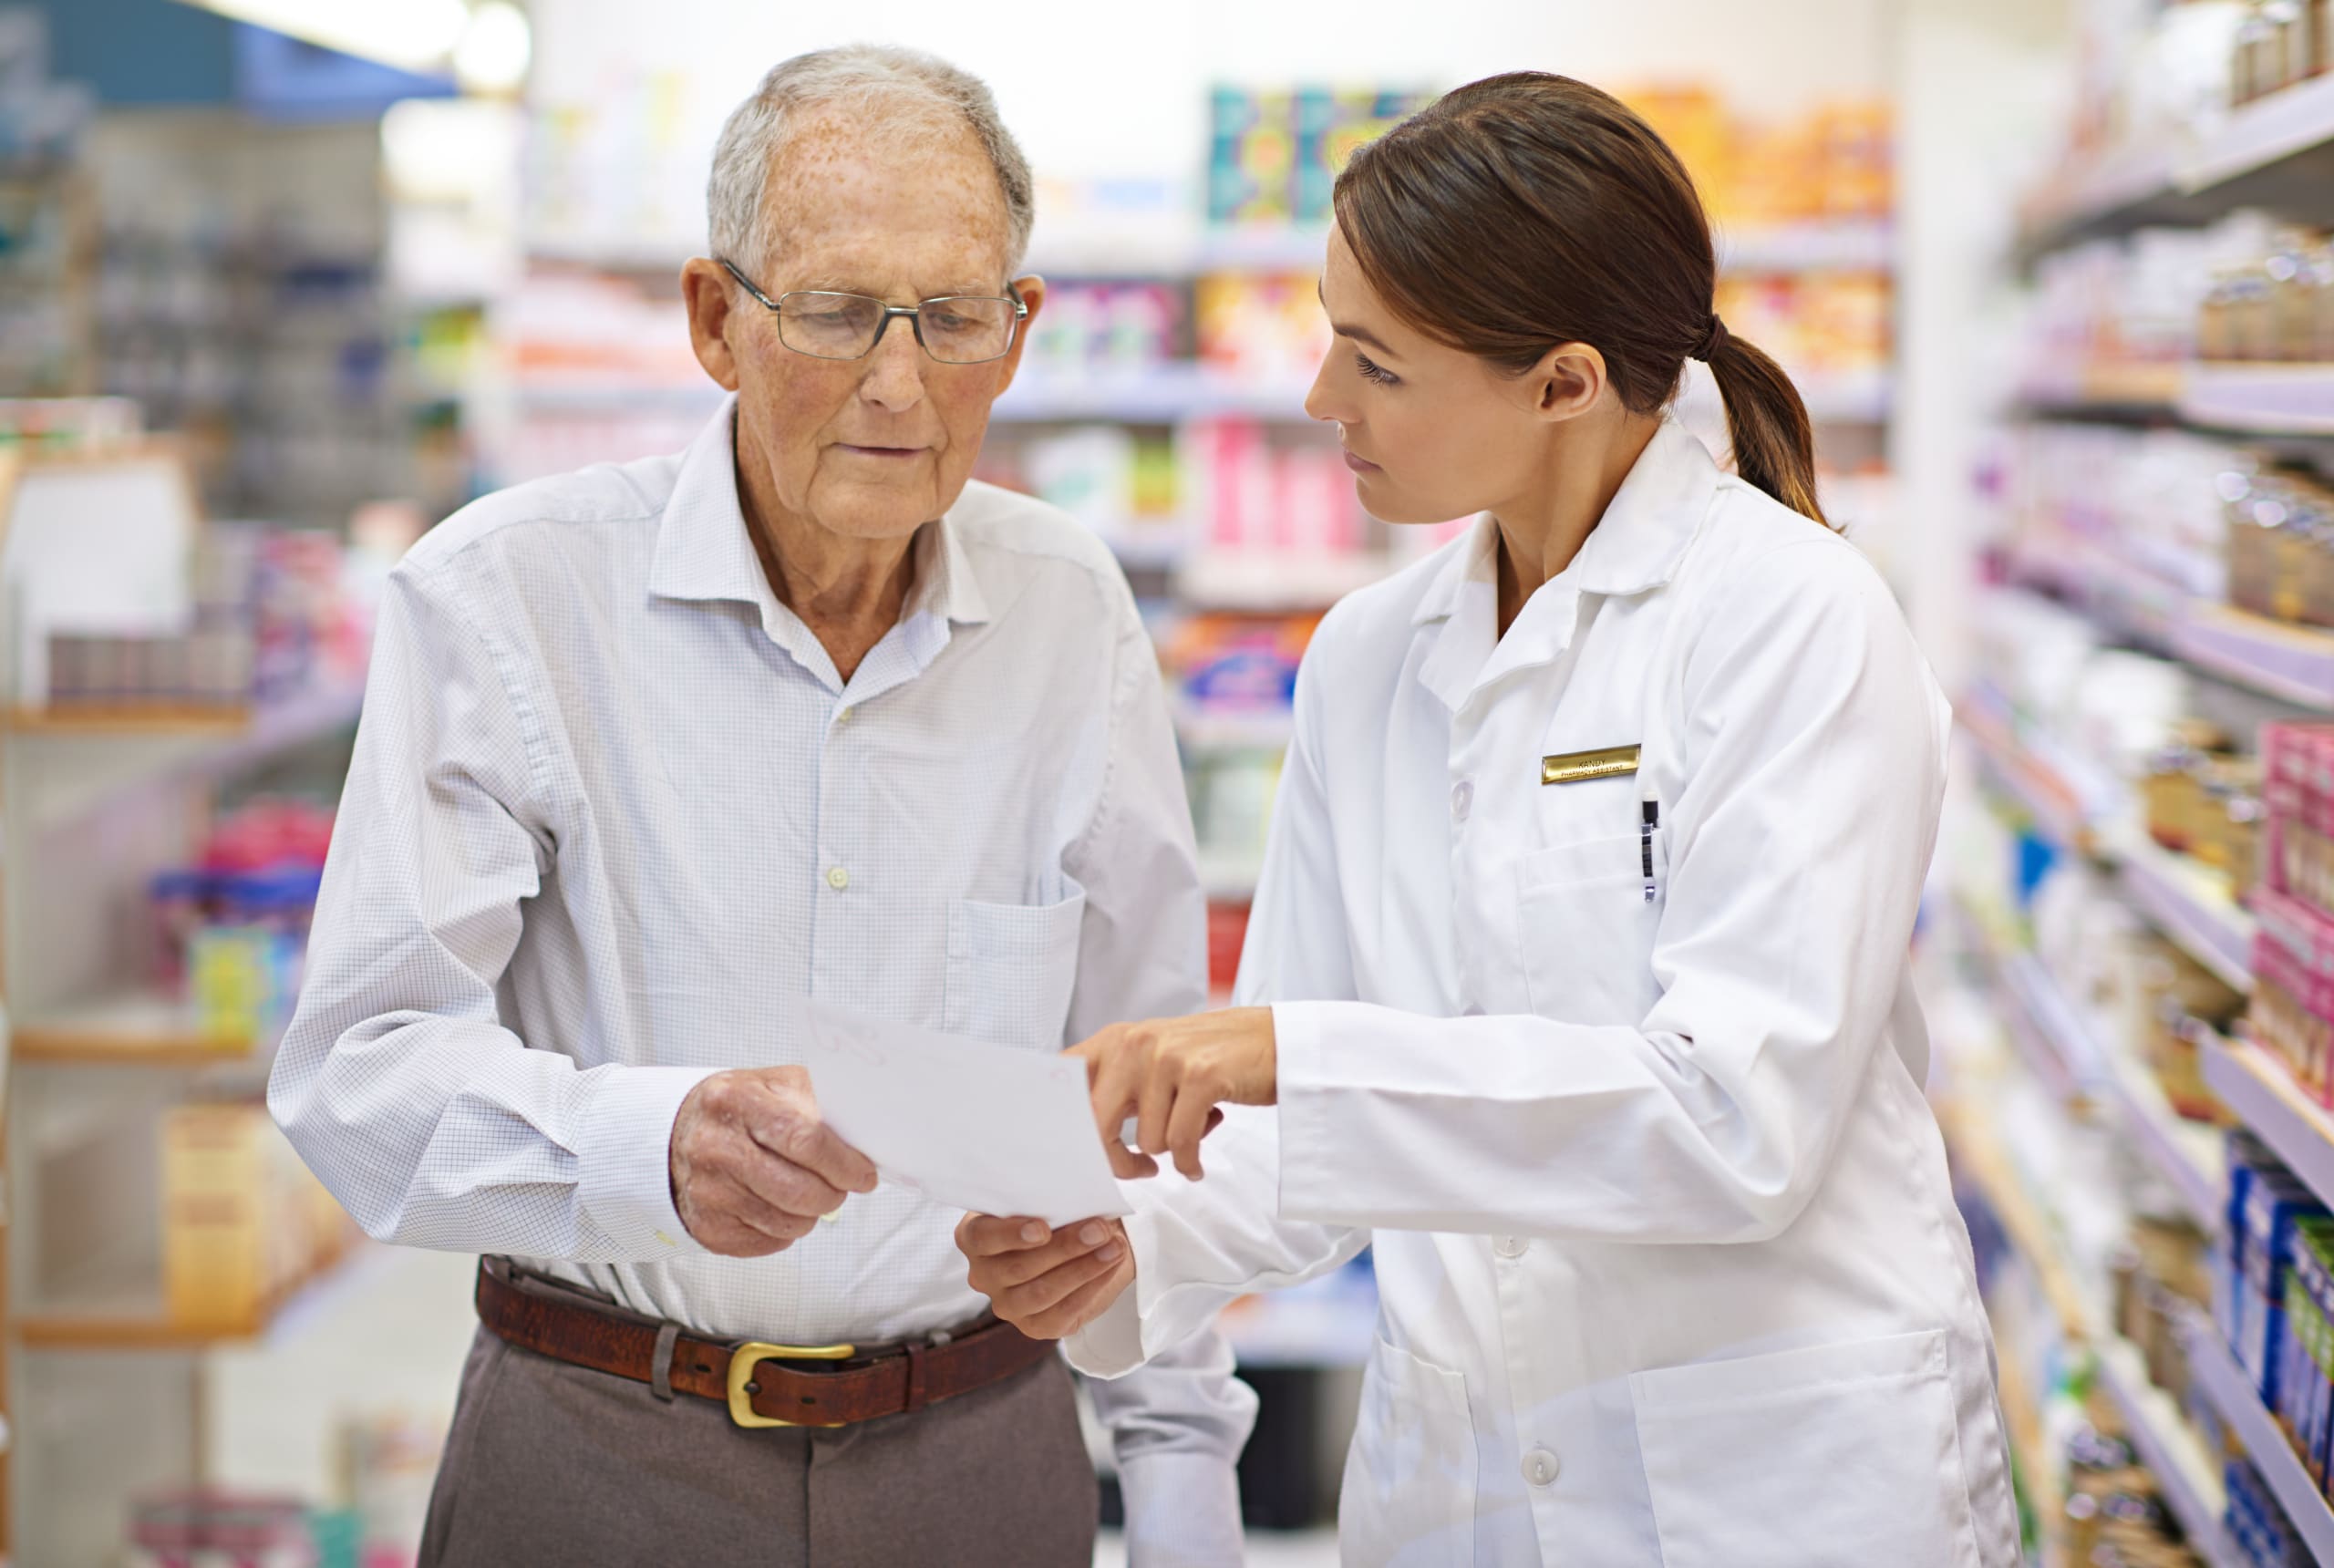 A young pharmacist helping an elderly customer with his prescription.